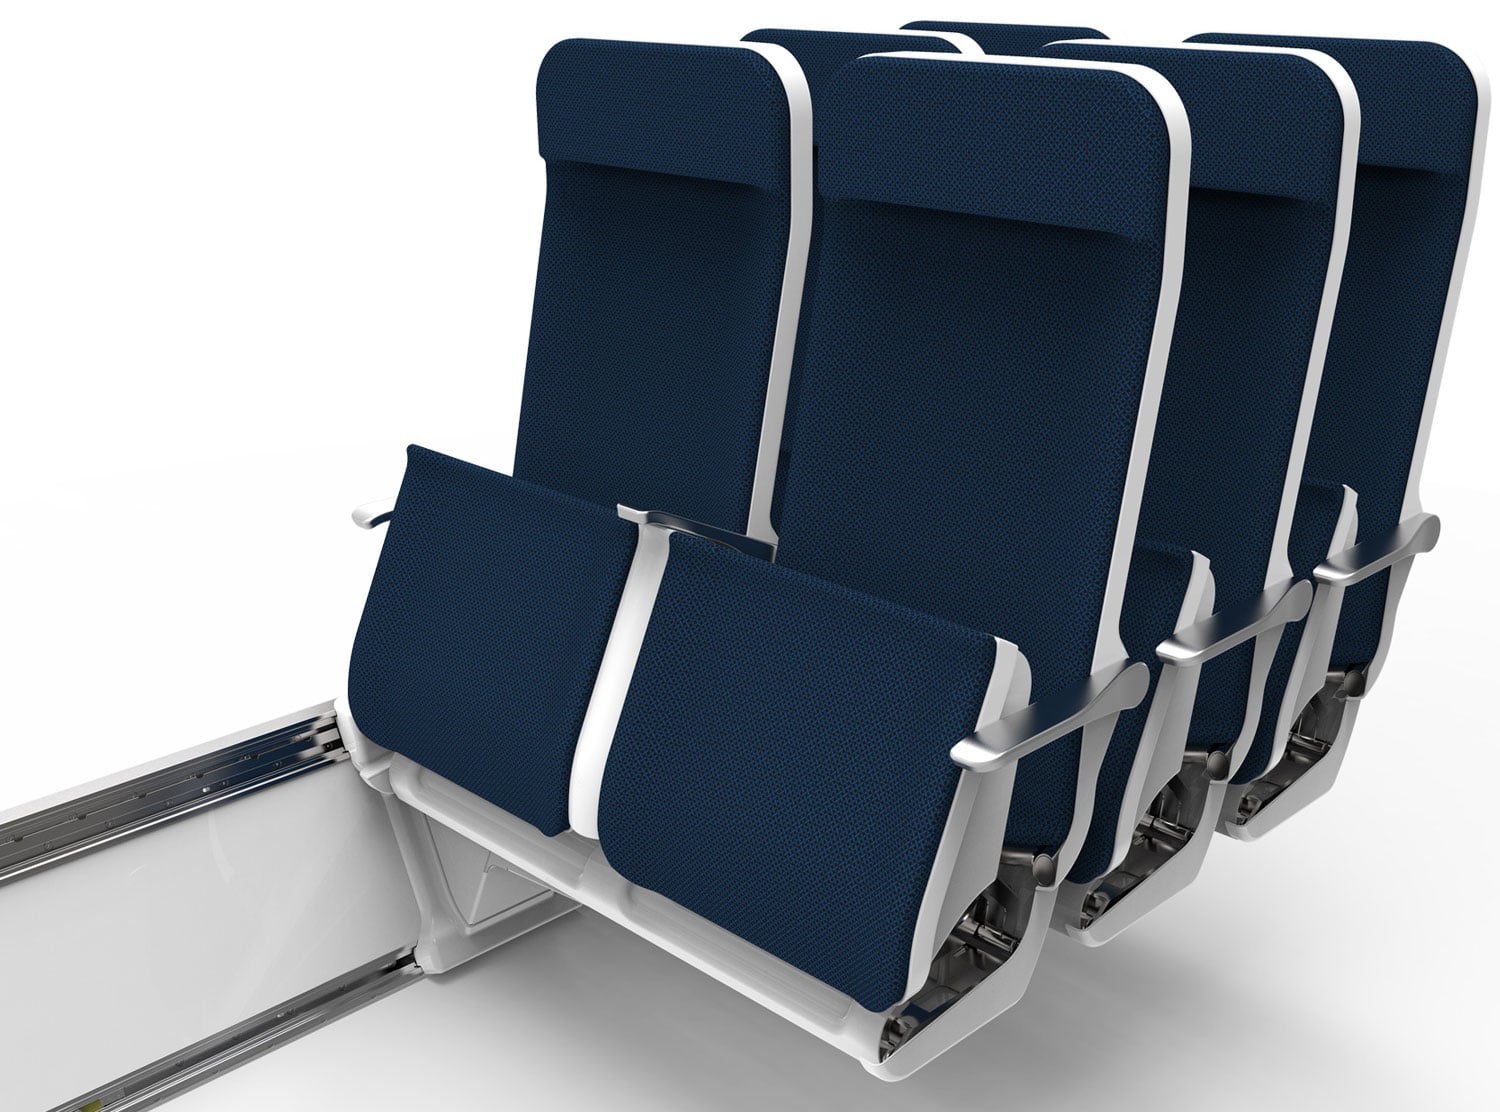 Adaptable carriage seats